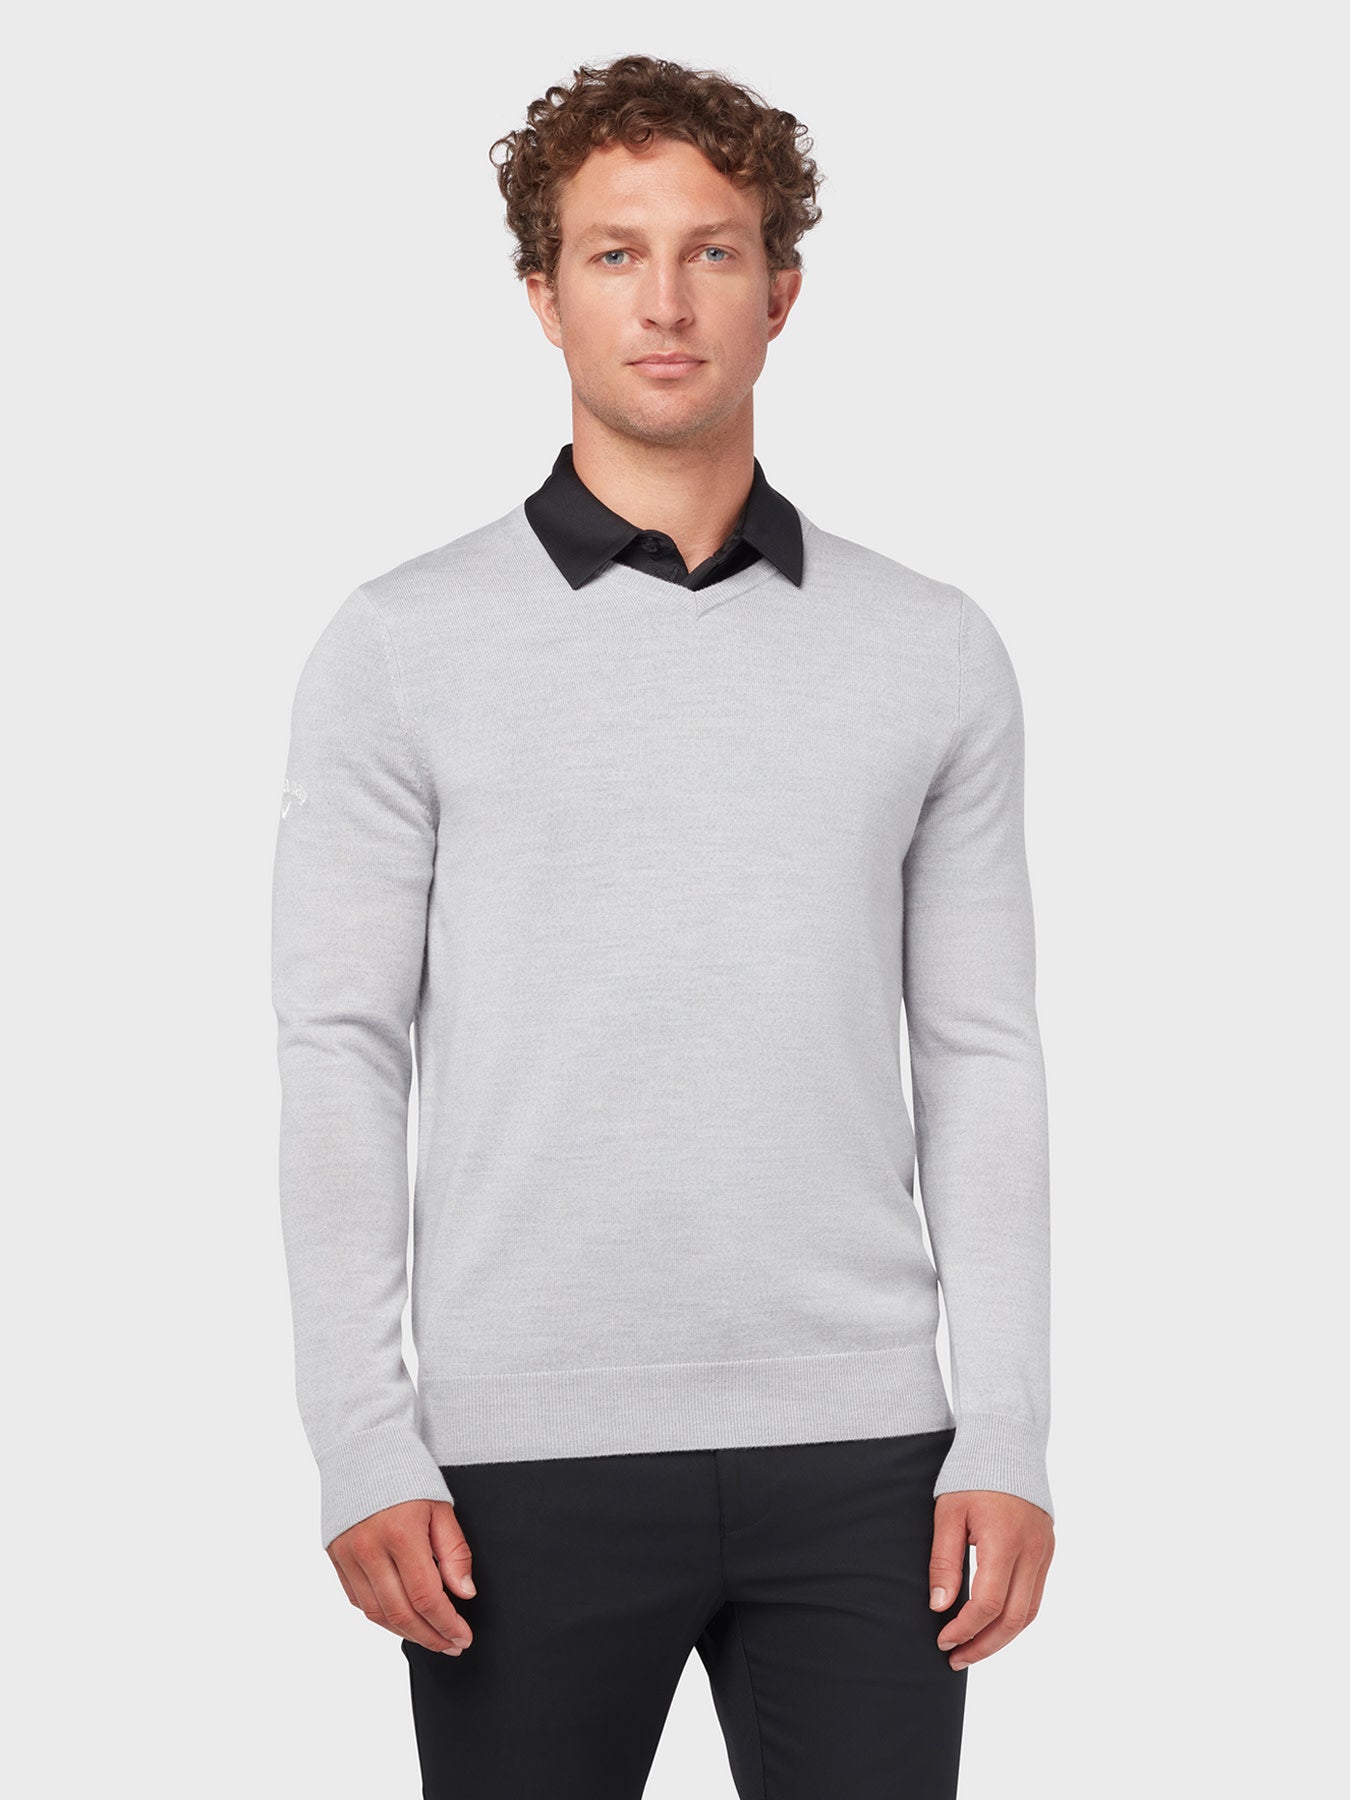 View VNeck Merino Sweater In Pearl Blue Heather information